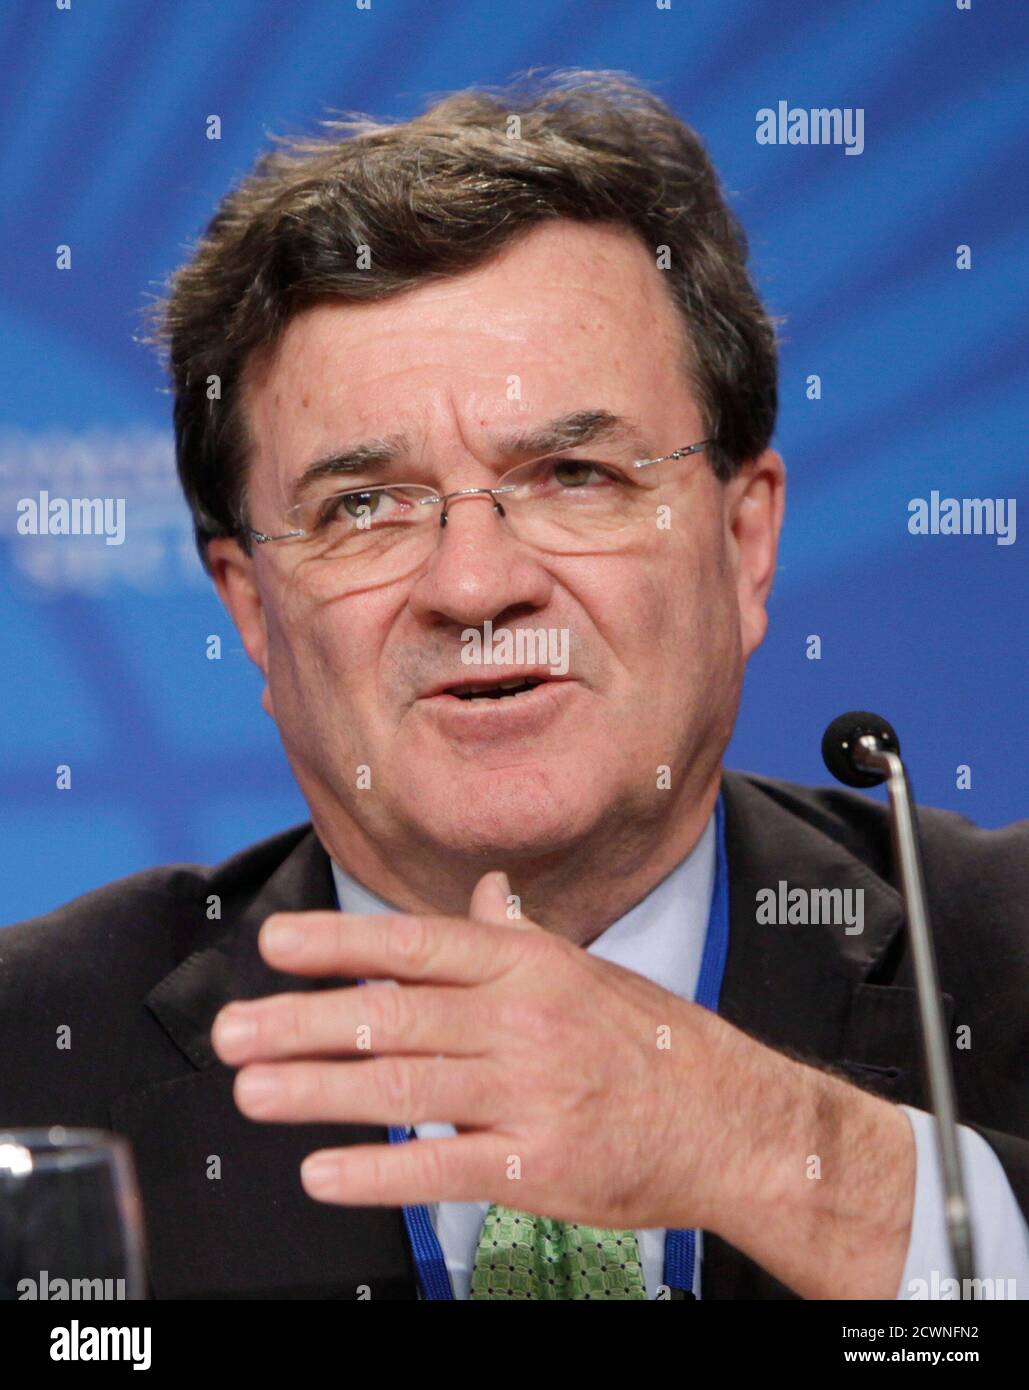 Canada's Finance Minister Jim Flaherty speaks at the Commonwealth Secretariat news conference during the annual IMF-World Bank meeting at the IMF headquarters in Washington October 8, 2010. REUTERS/Yuri Gripas (UNITED STATES - Tags: POLITICS BUSINESS) Stock Photo